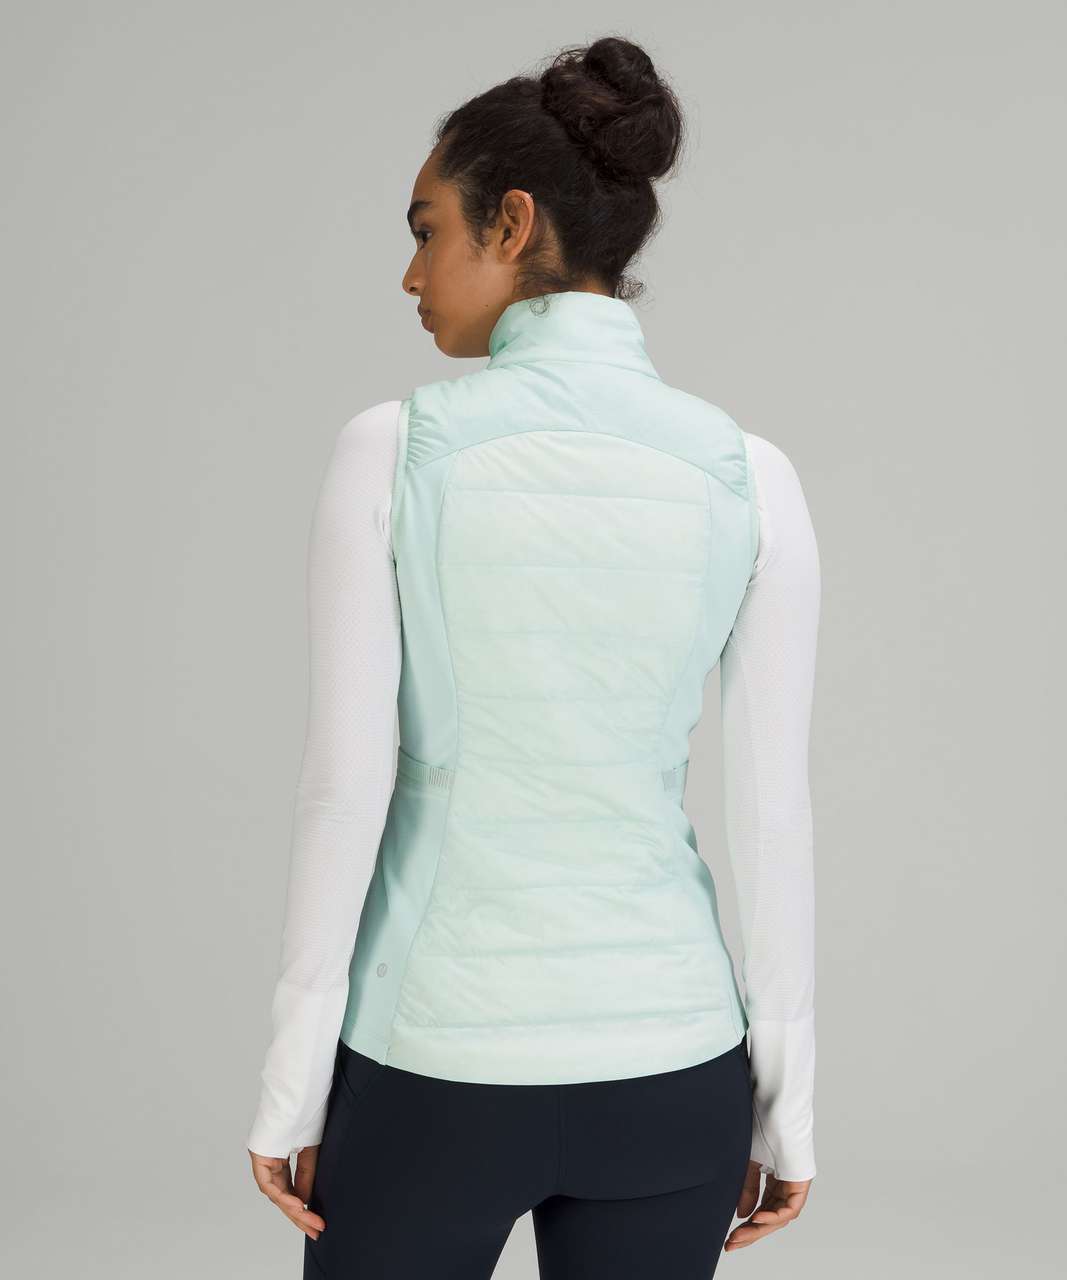 Lululemon Down For It All Vest 4-Way Stretch Size 6 Delicate Mint DELM 75204